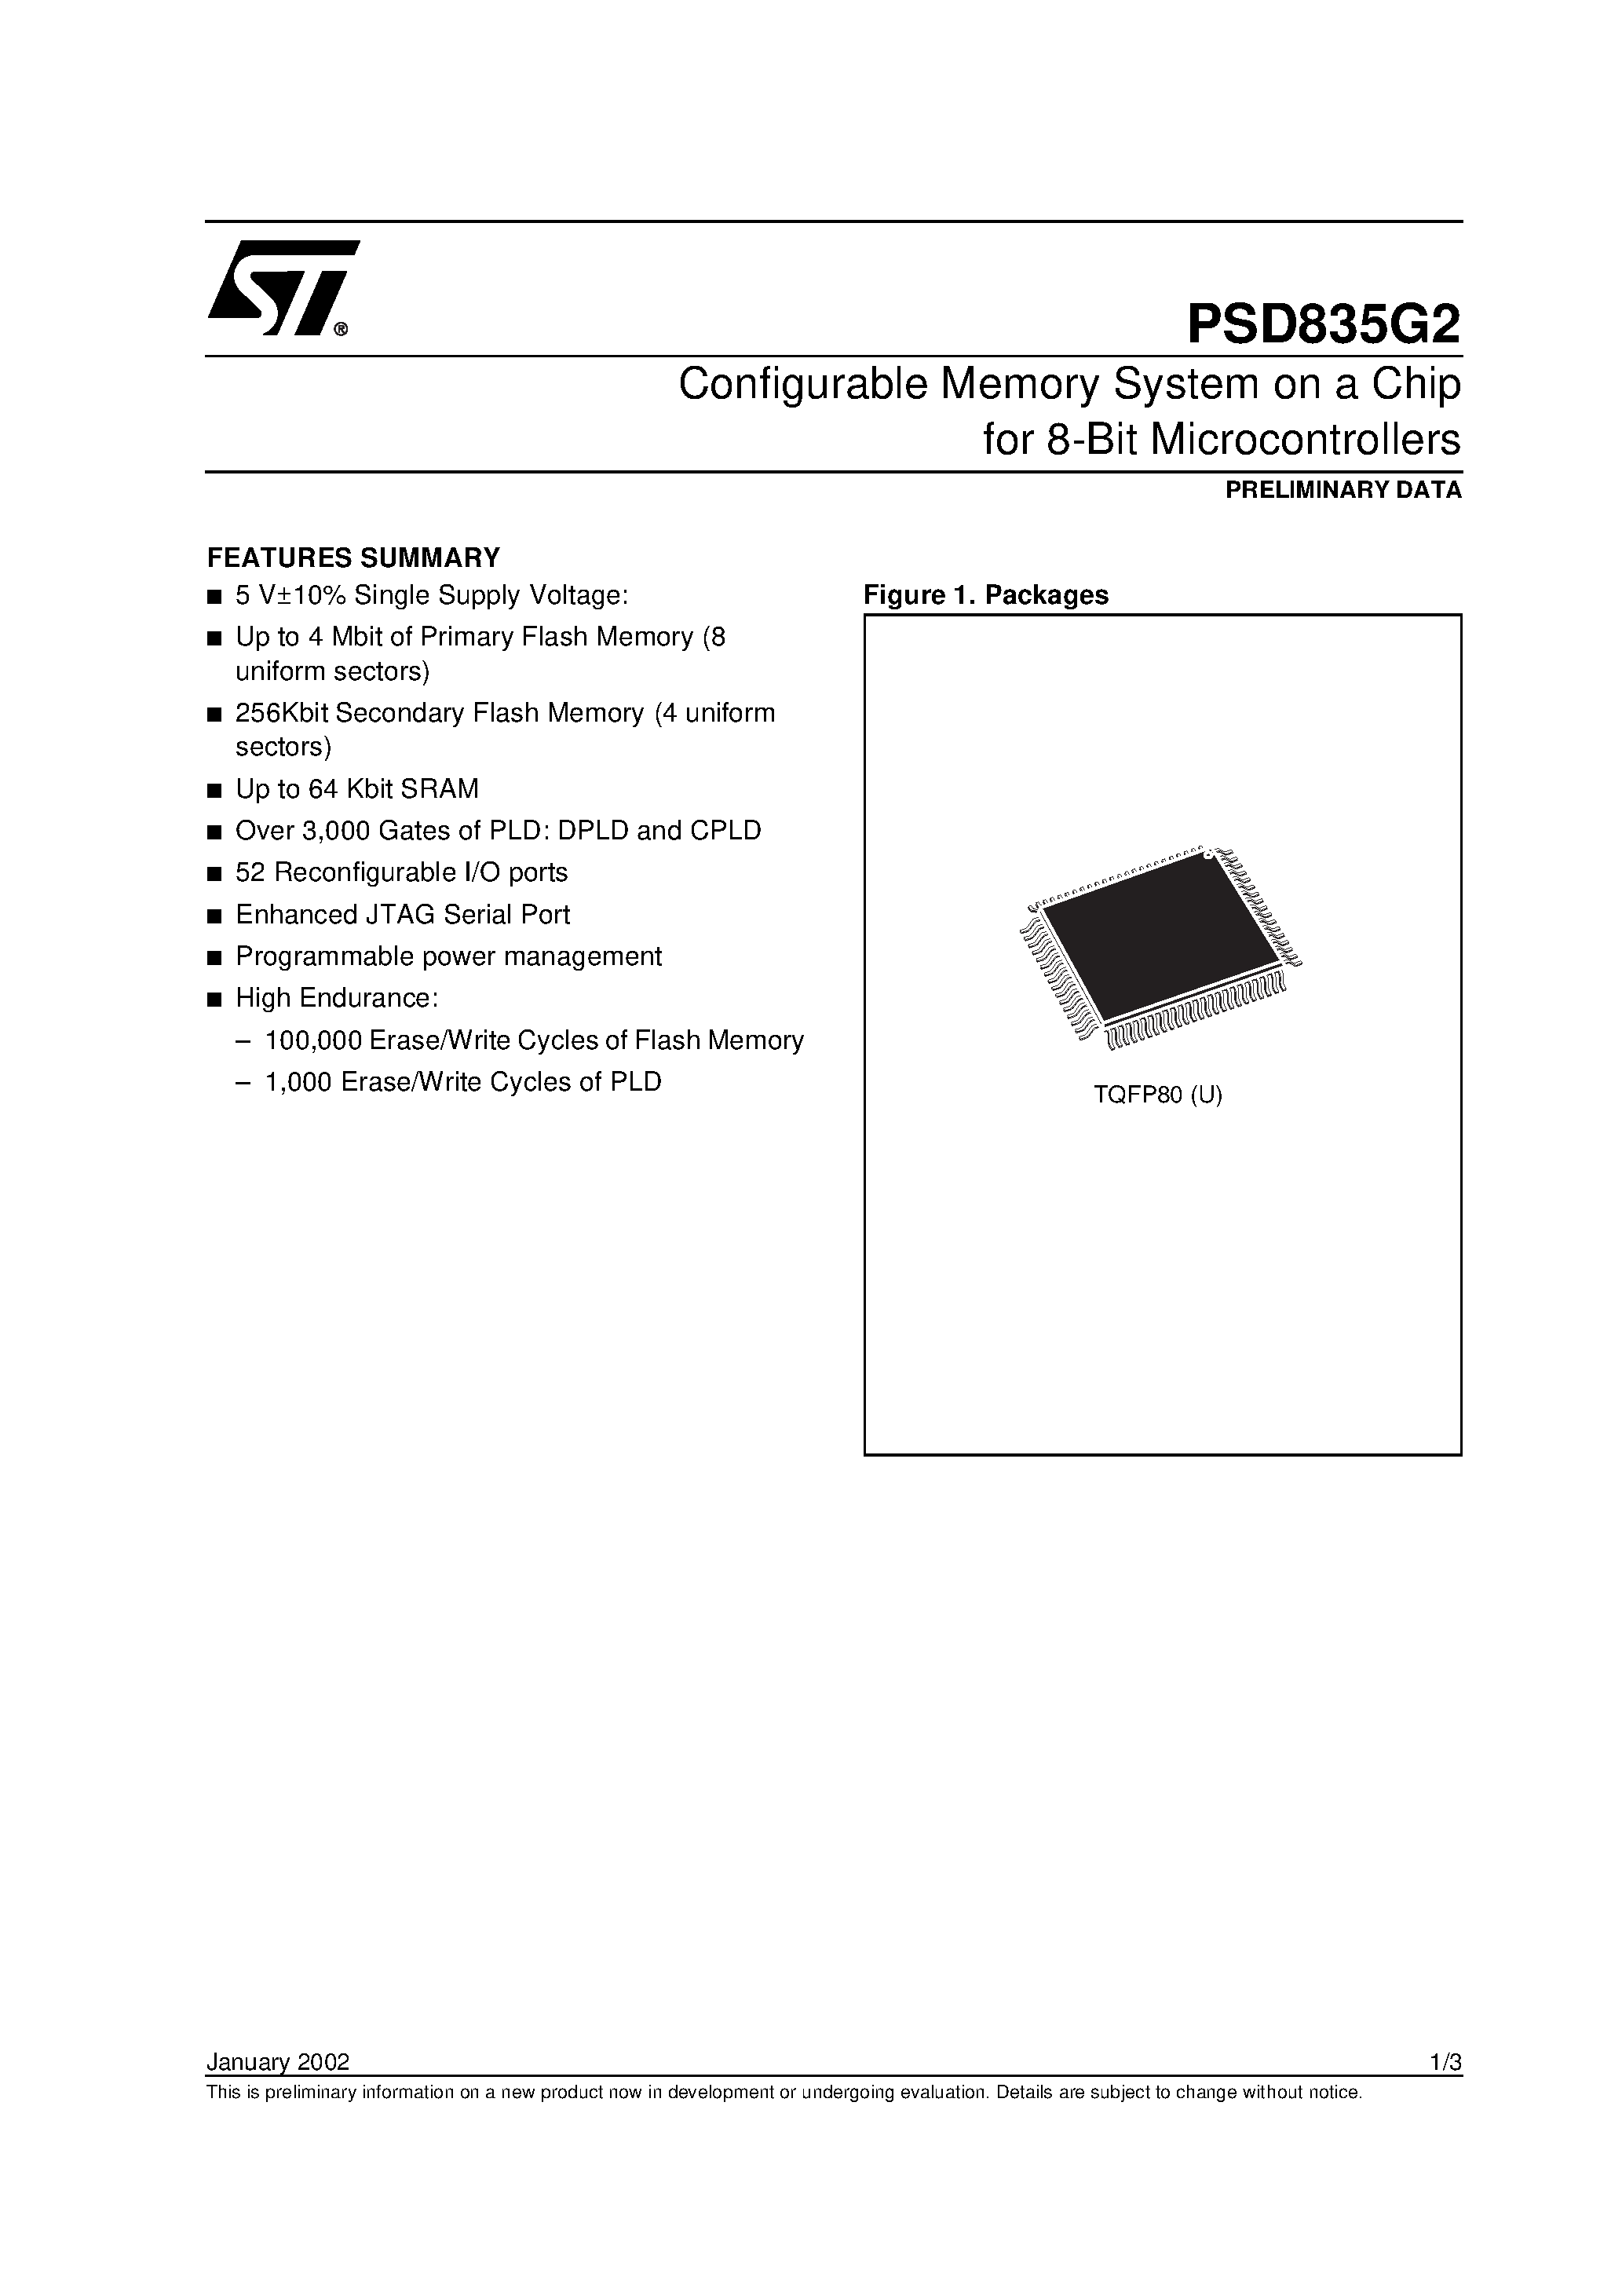 Datasheet PSD835F1V-A-15U - Configurable Memory System on a Chip for 8-Bit Microcontrollers page 1